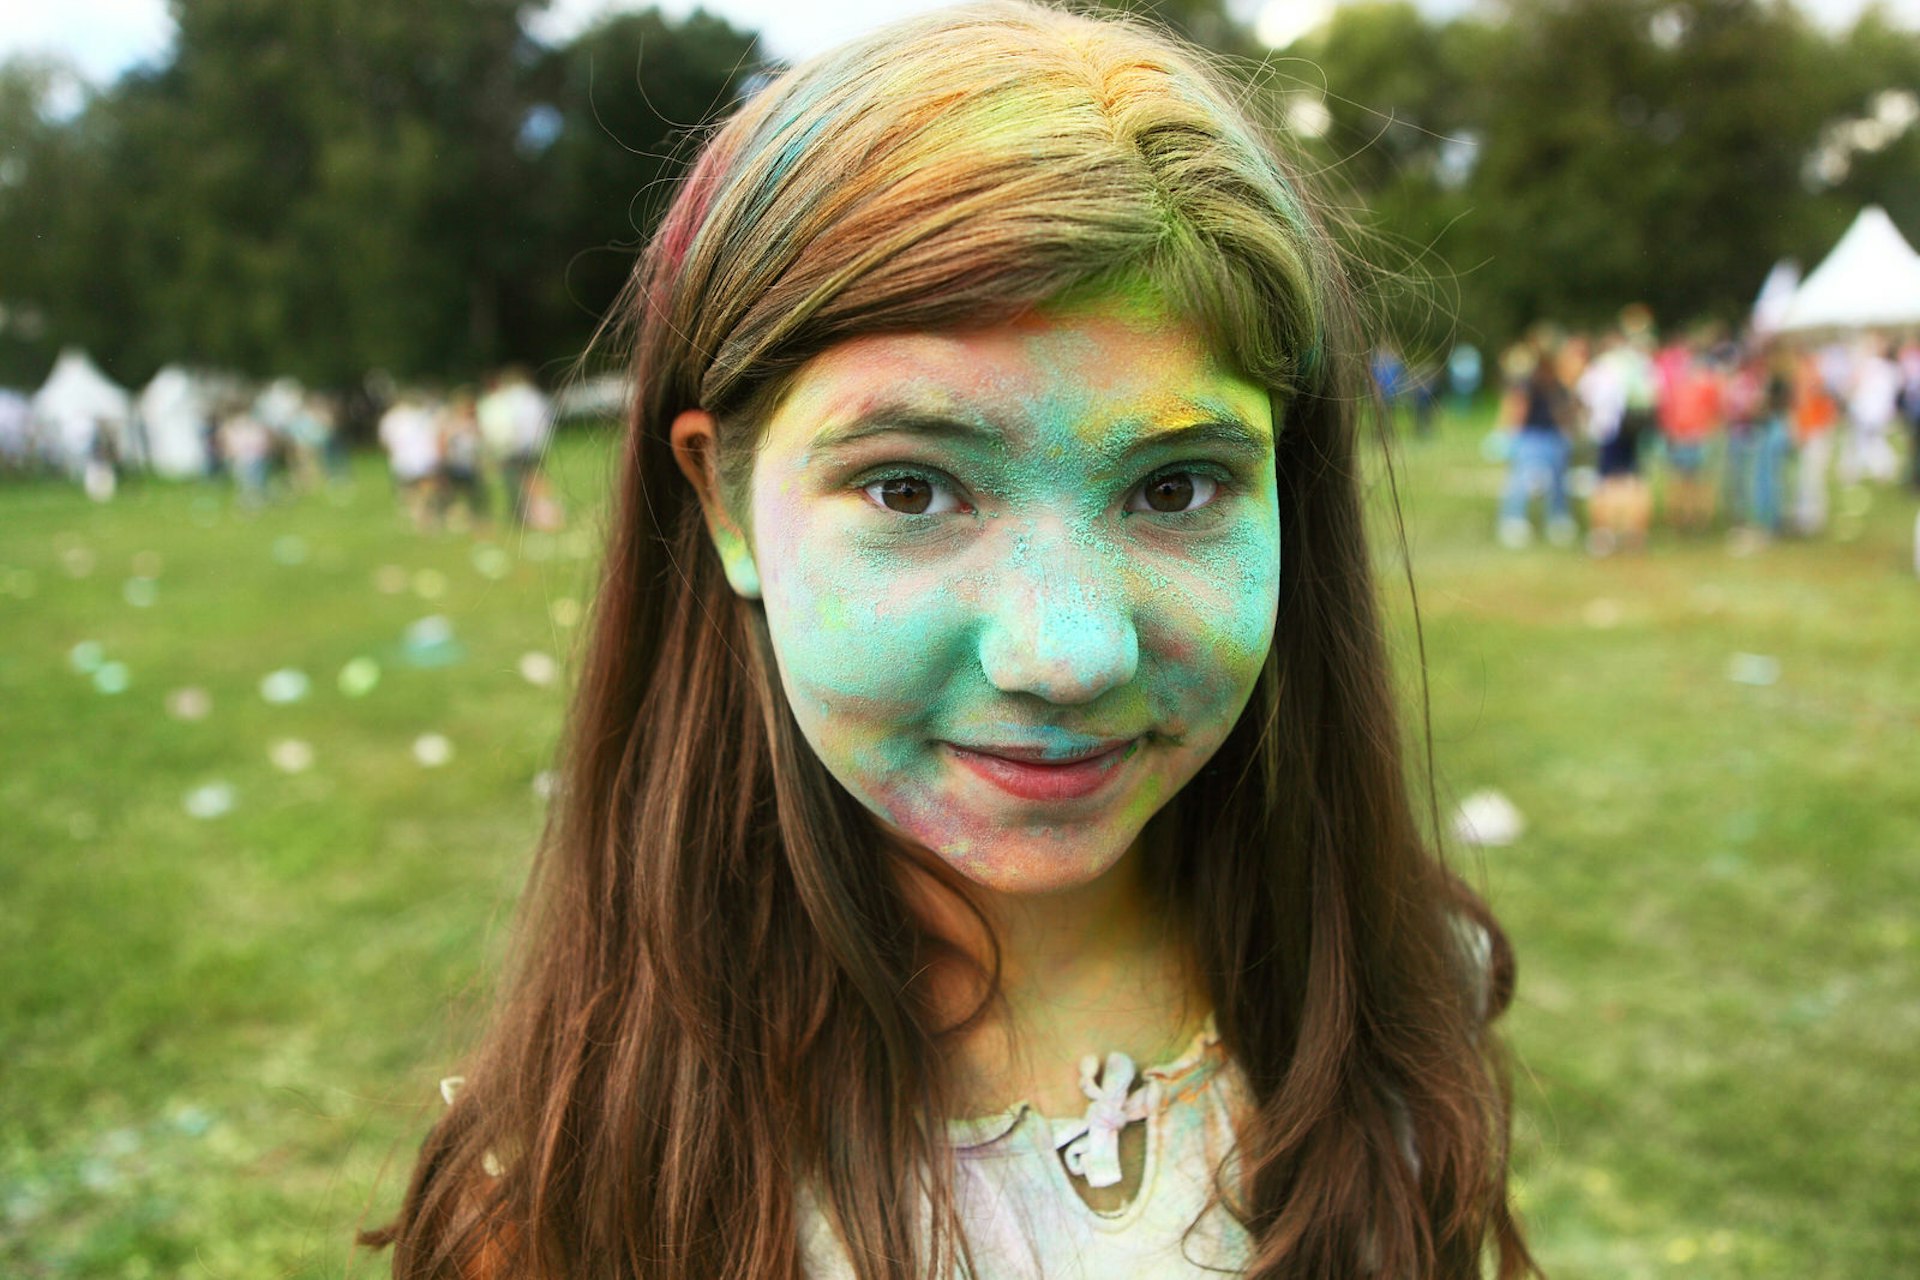 Little girl with face paint at festival© Lapina / Shutterstock